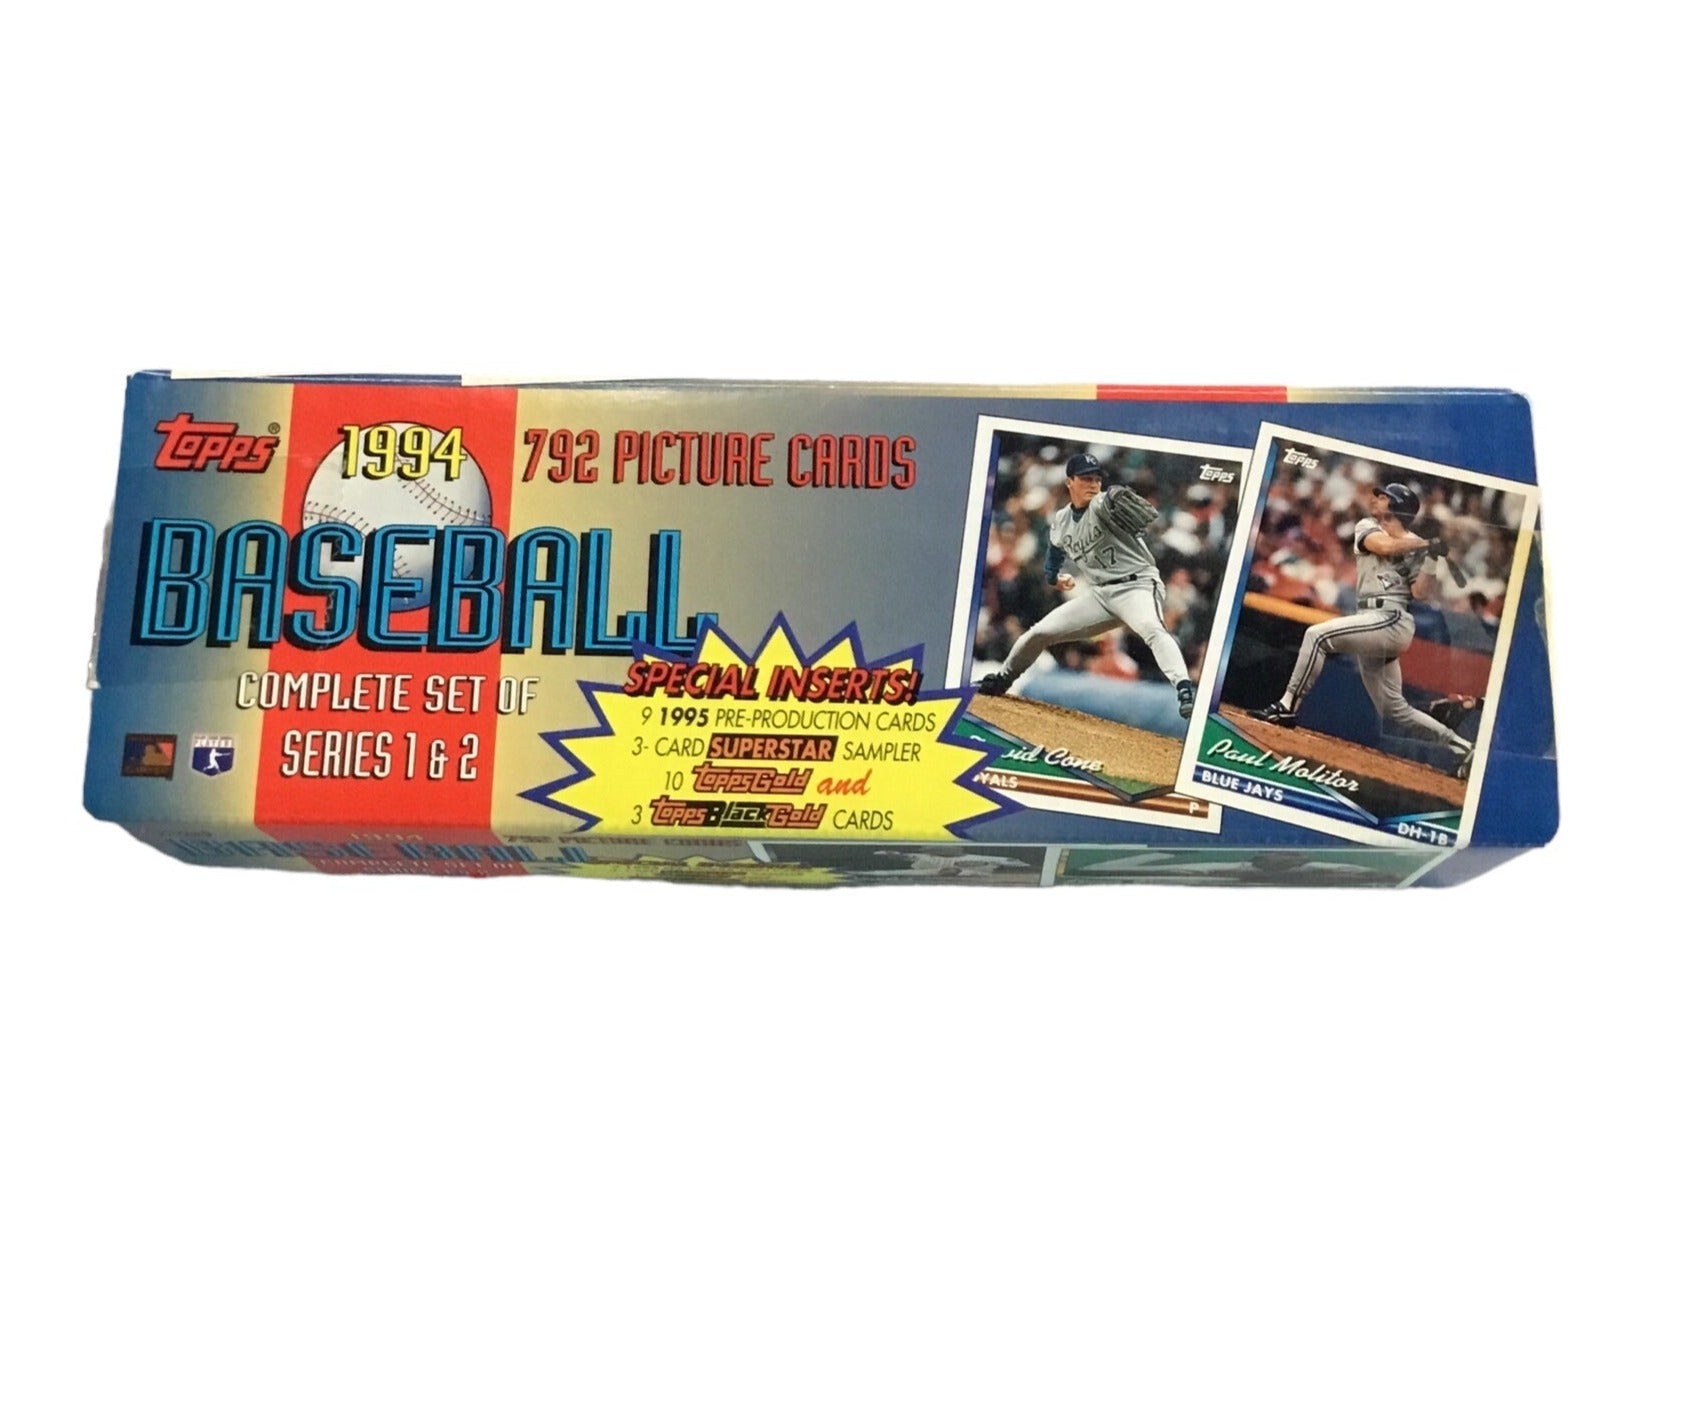 1994 Topps Baseball Complete Set of Series 1 & 2 Base set Only No Special Inserts